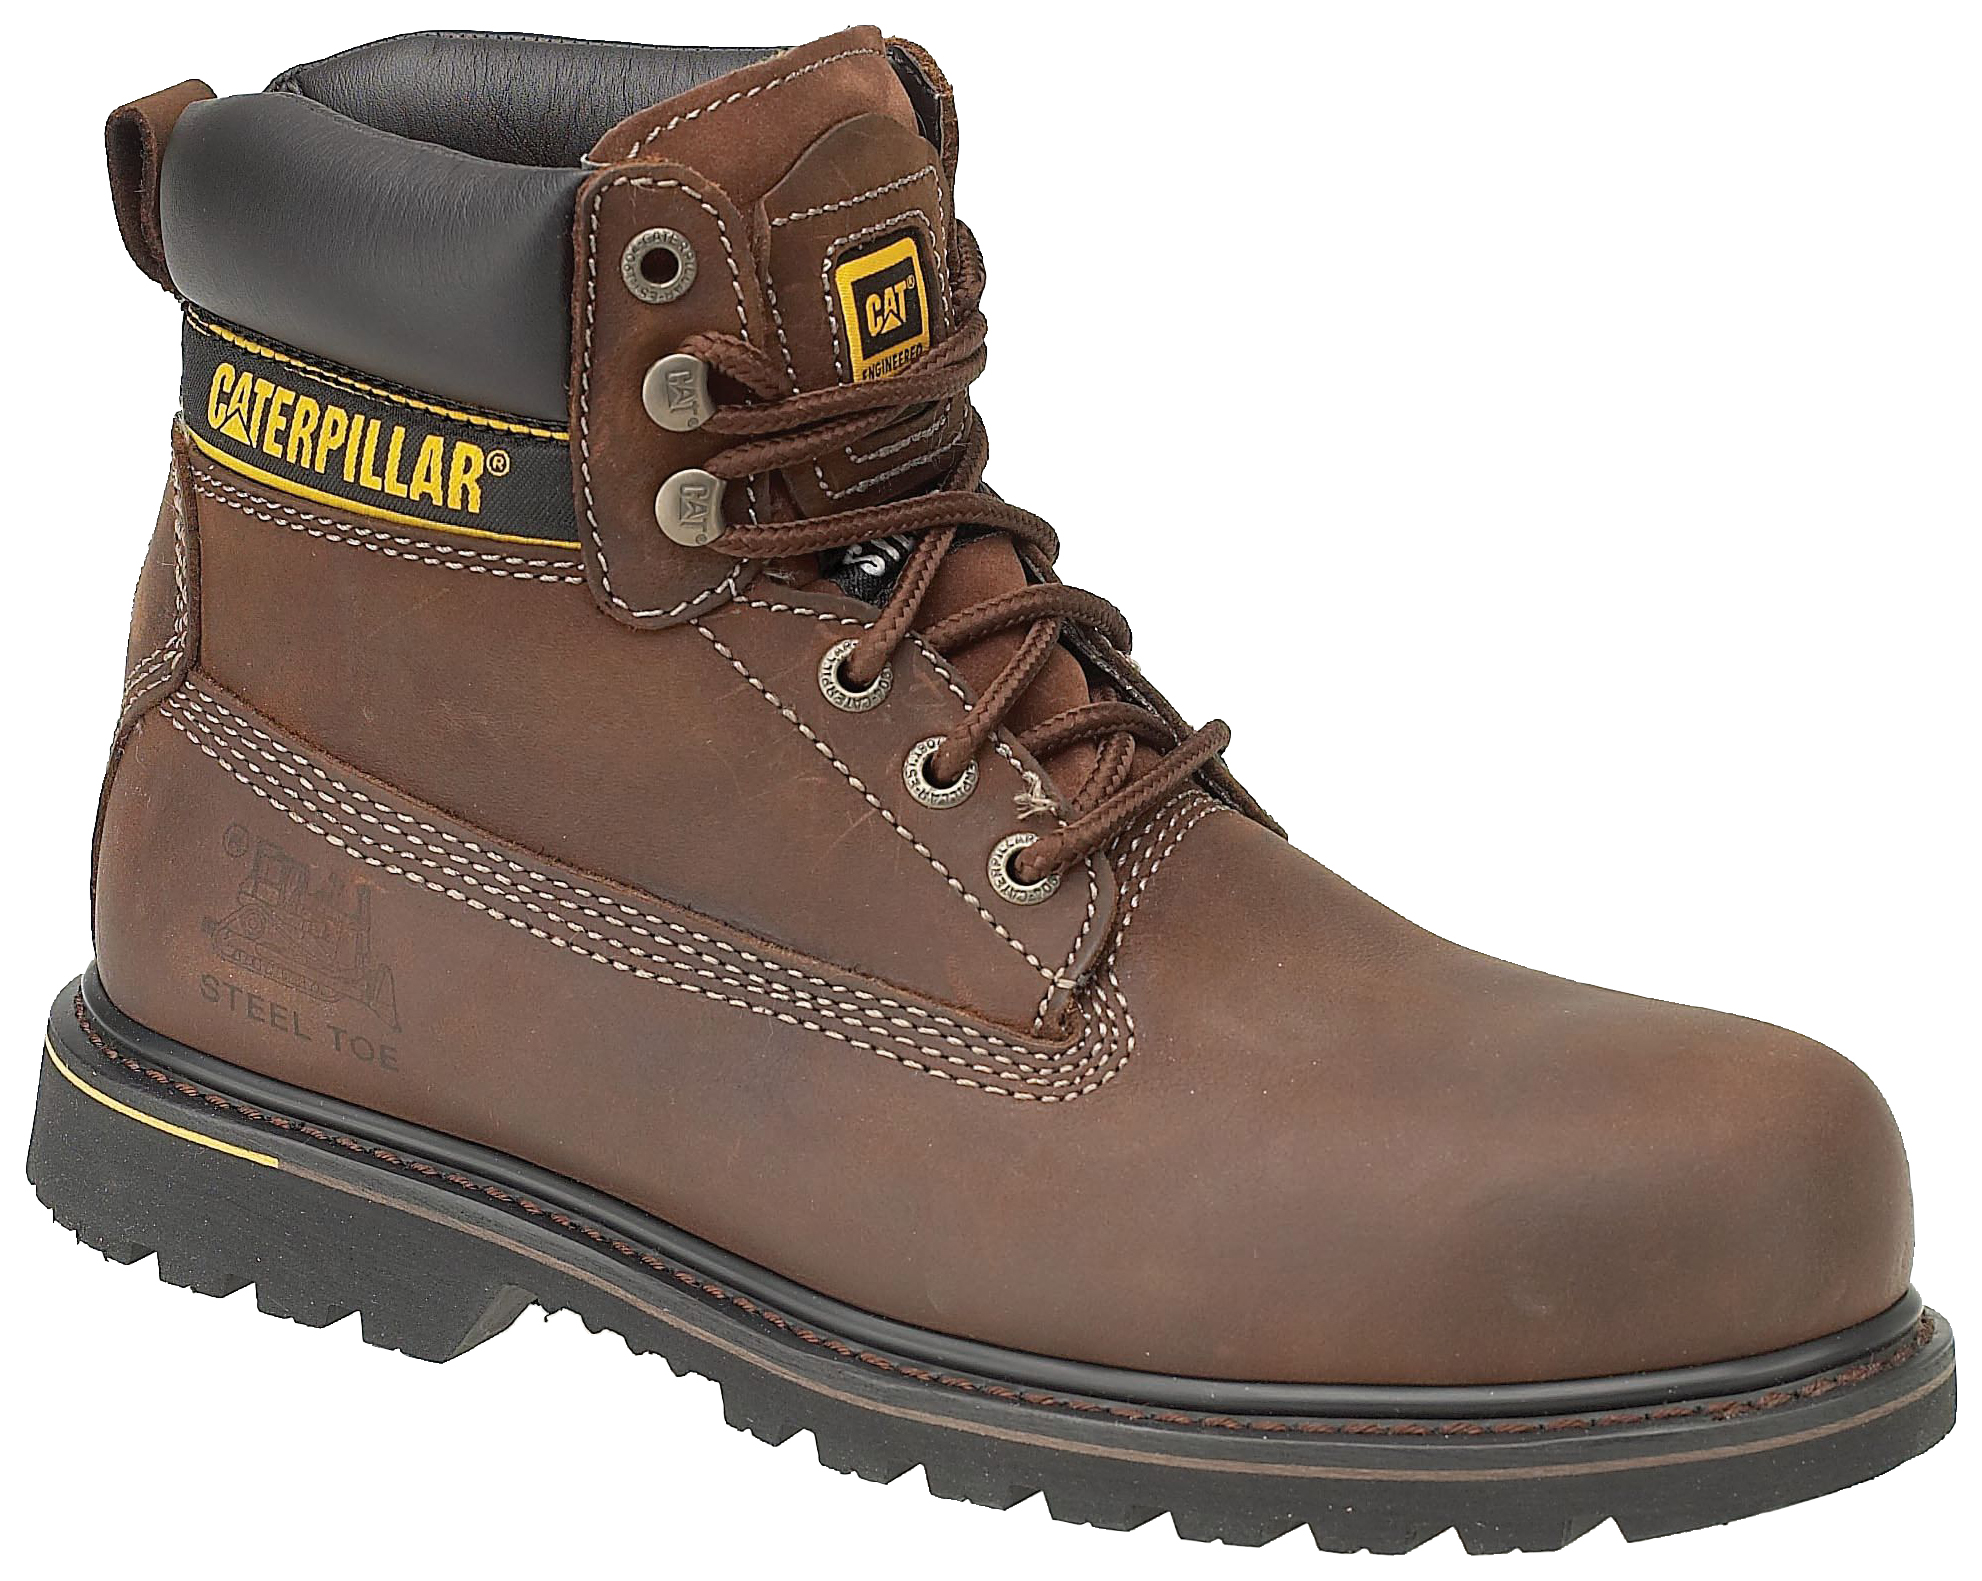 Caterpillar CAT Holton SB Safety Boot - Brown